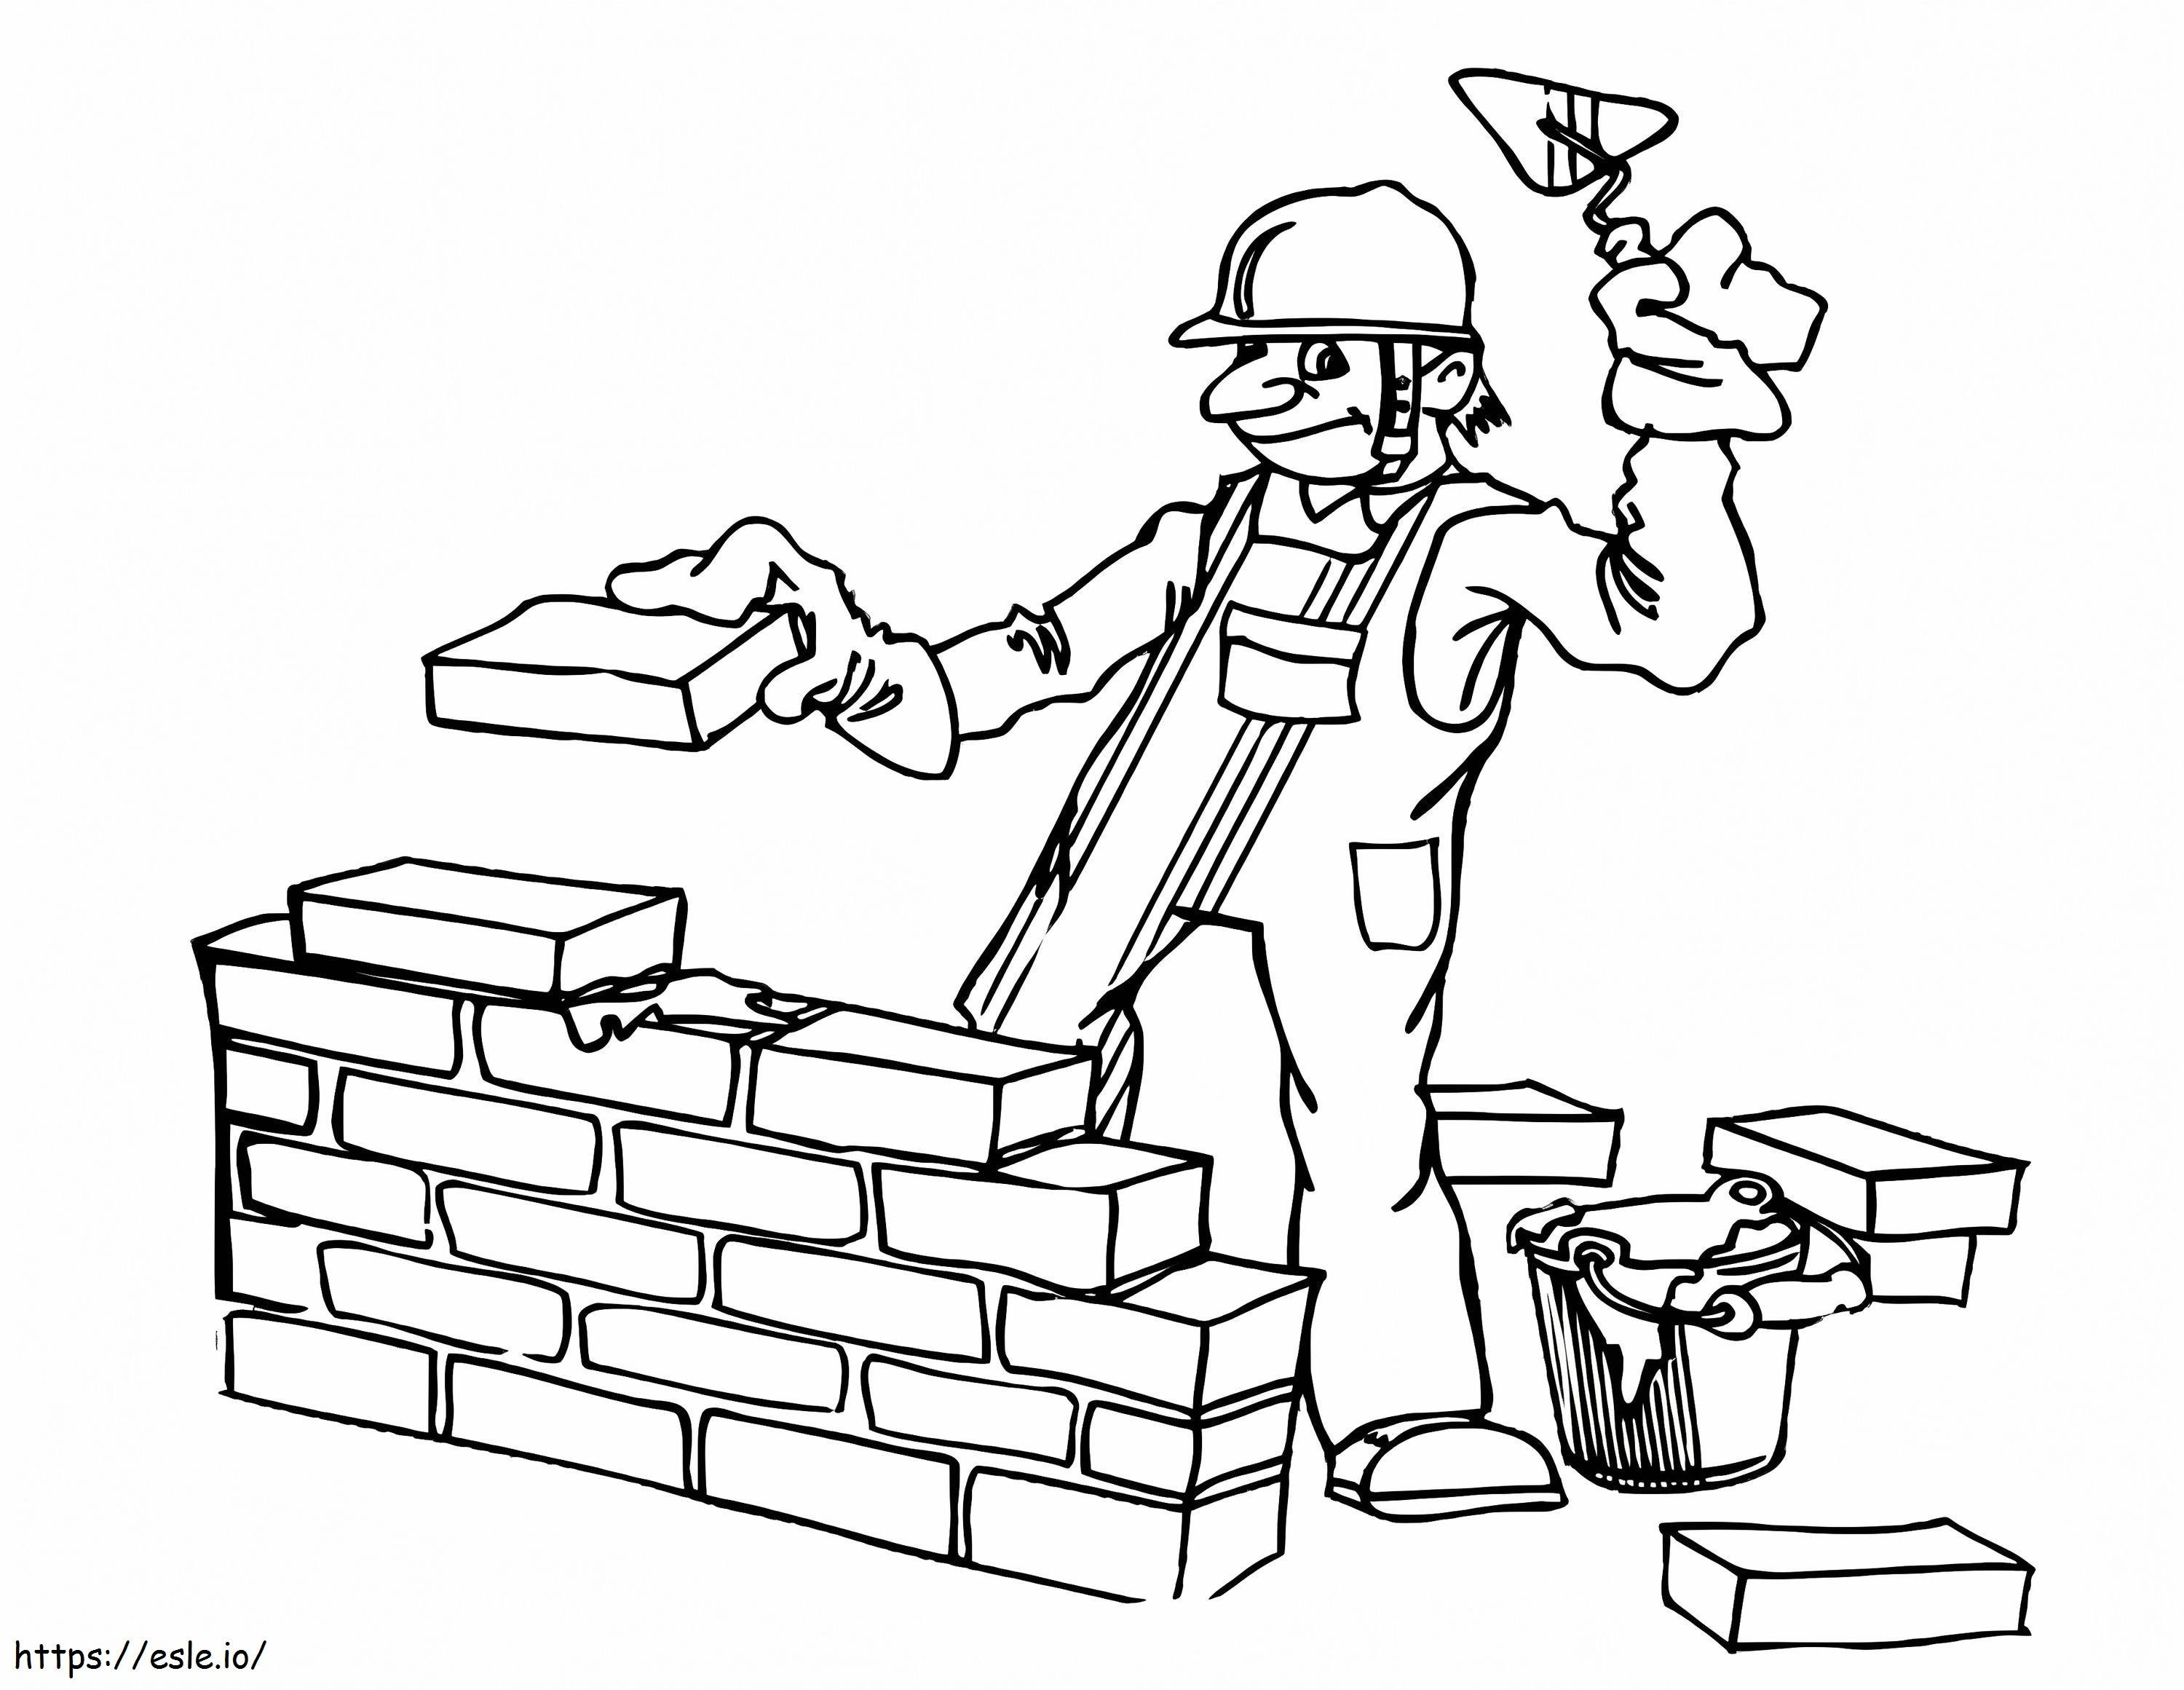 Construction Worker 1 coloring page